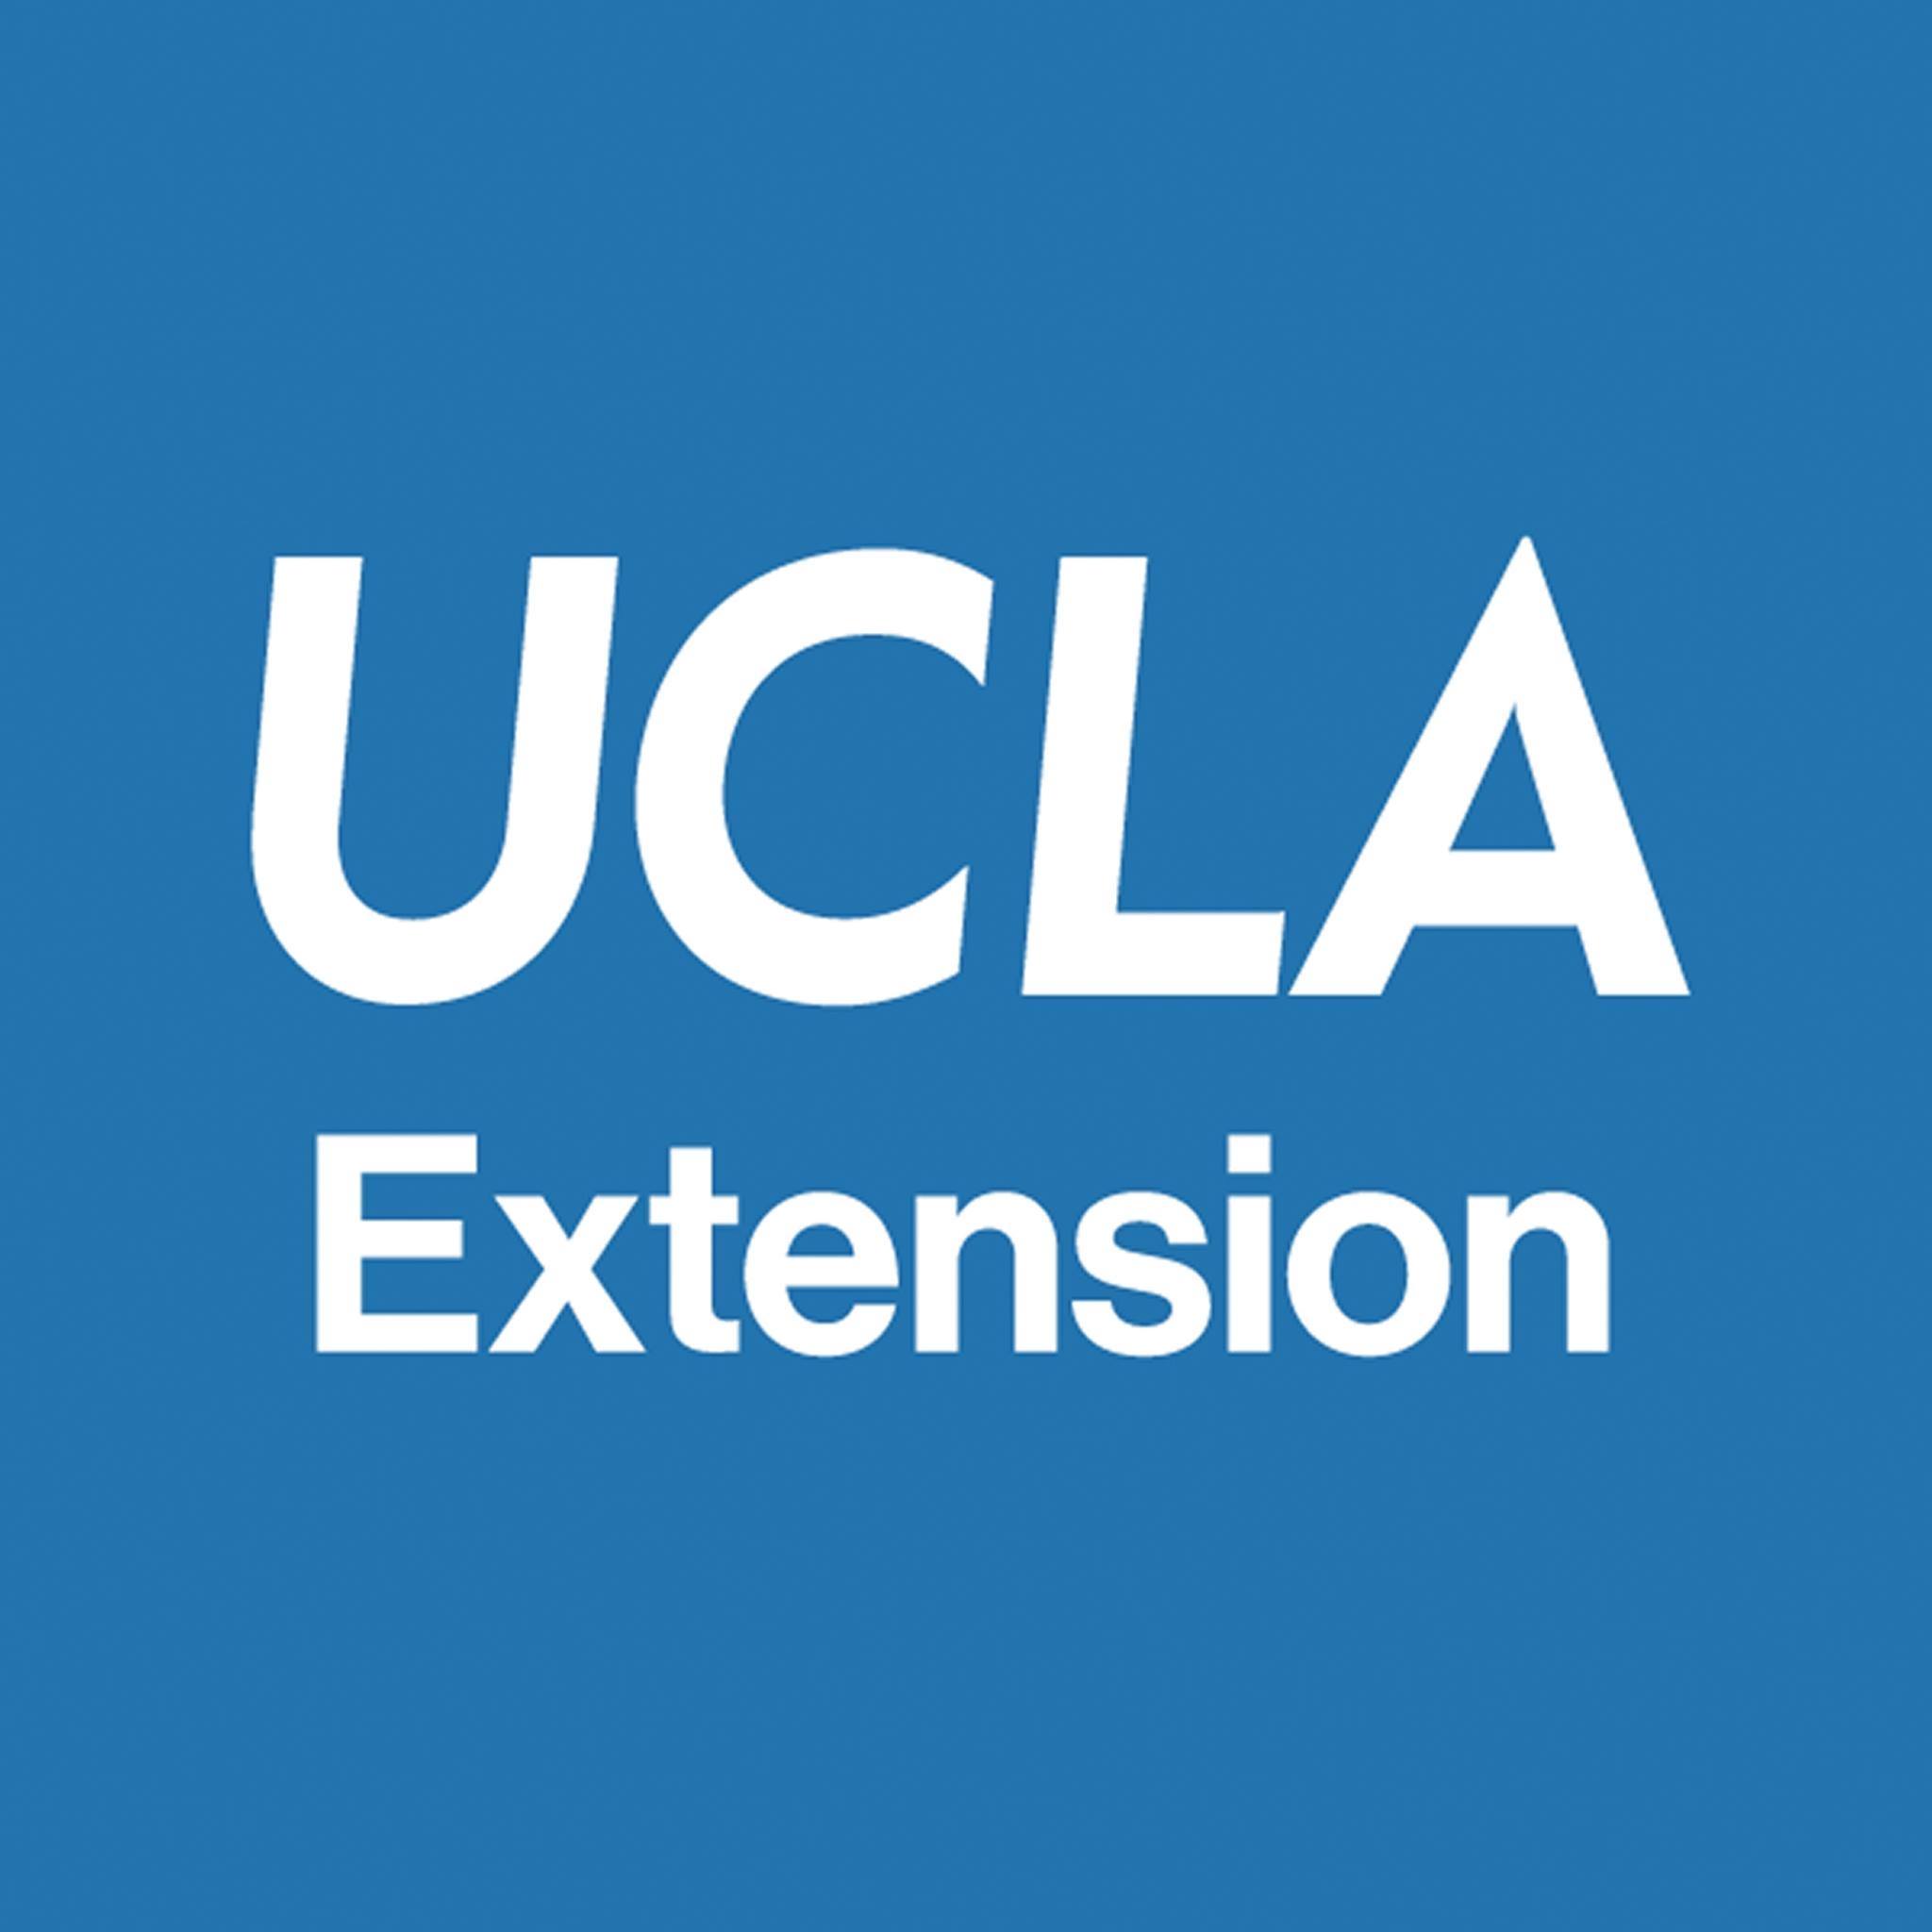 The Coding Boot Camp at UCLA Extension